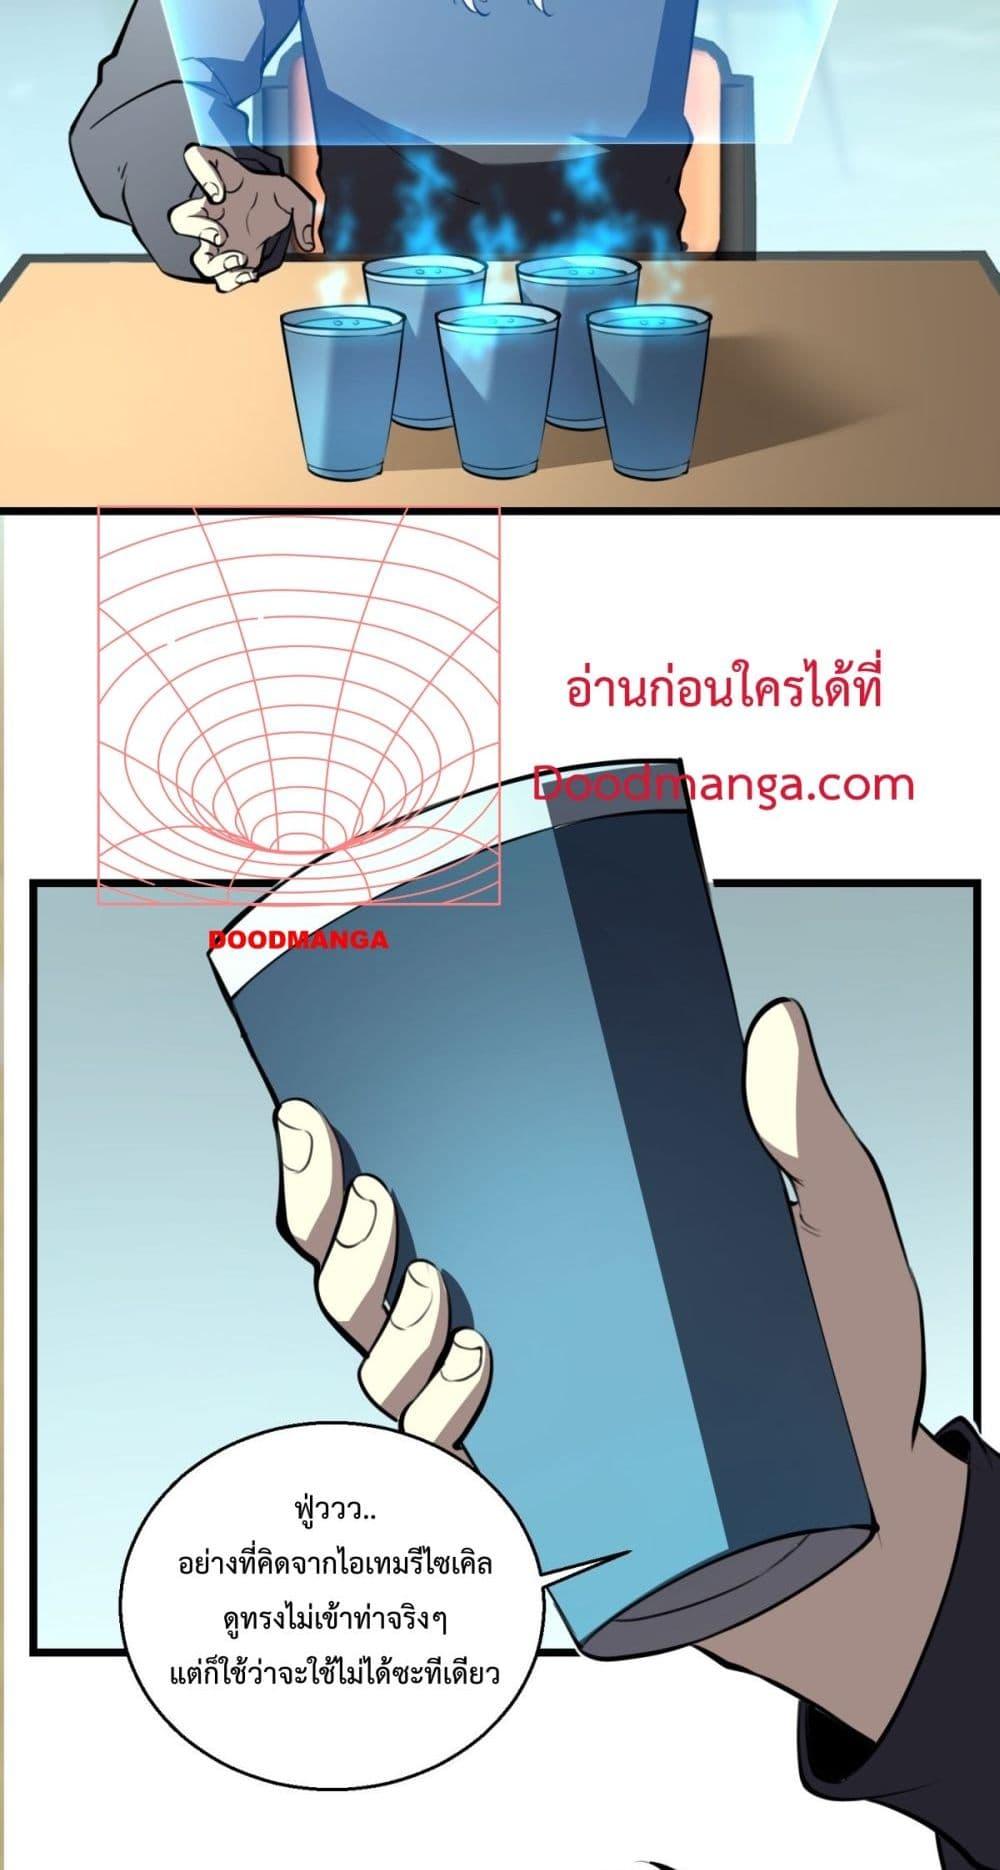 I Became The King by Scavenging ตอนที่ 11 (11)